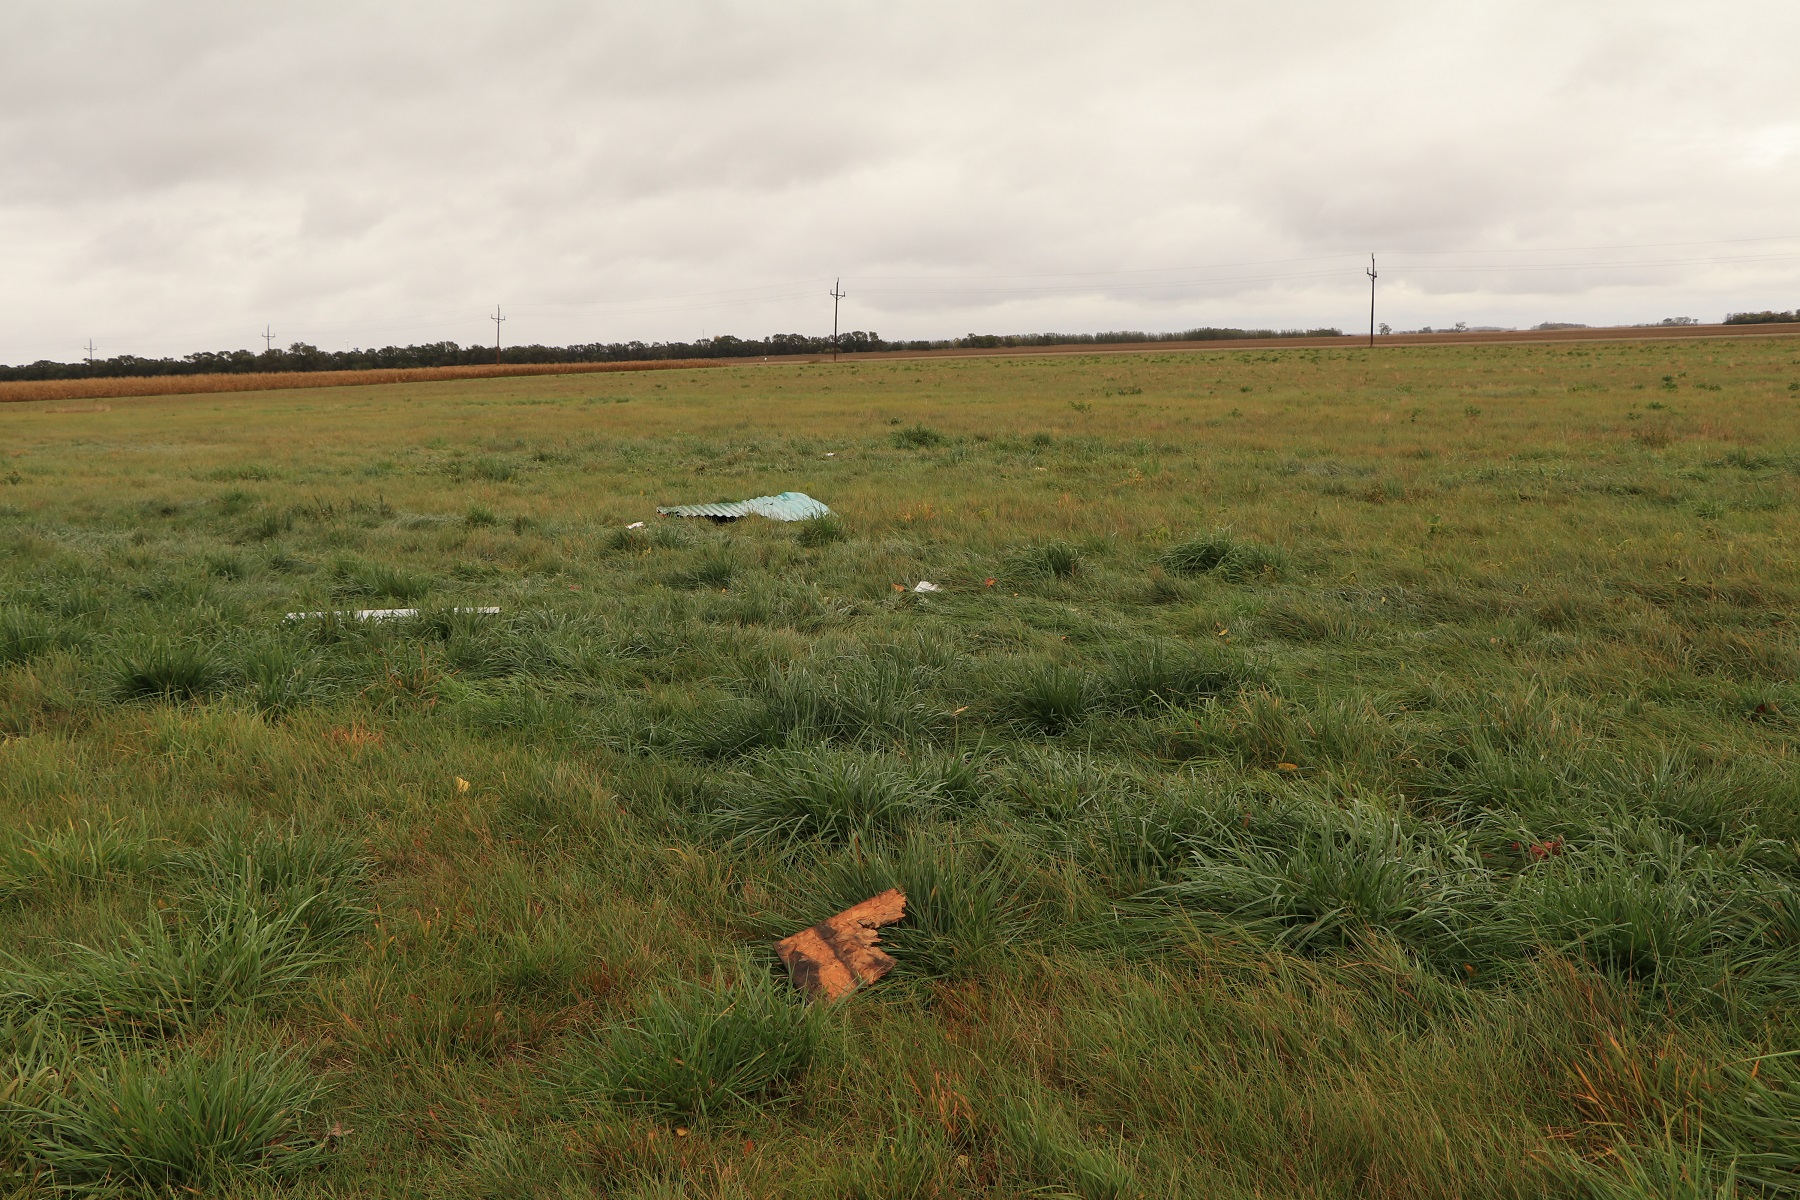 Tornado left debris in a field 2 miles to the southwest of Dumont, MN.  (Photo by Nick and Amanda Elms)